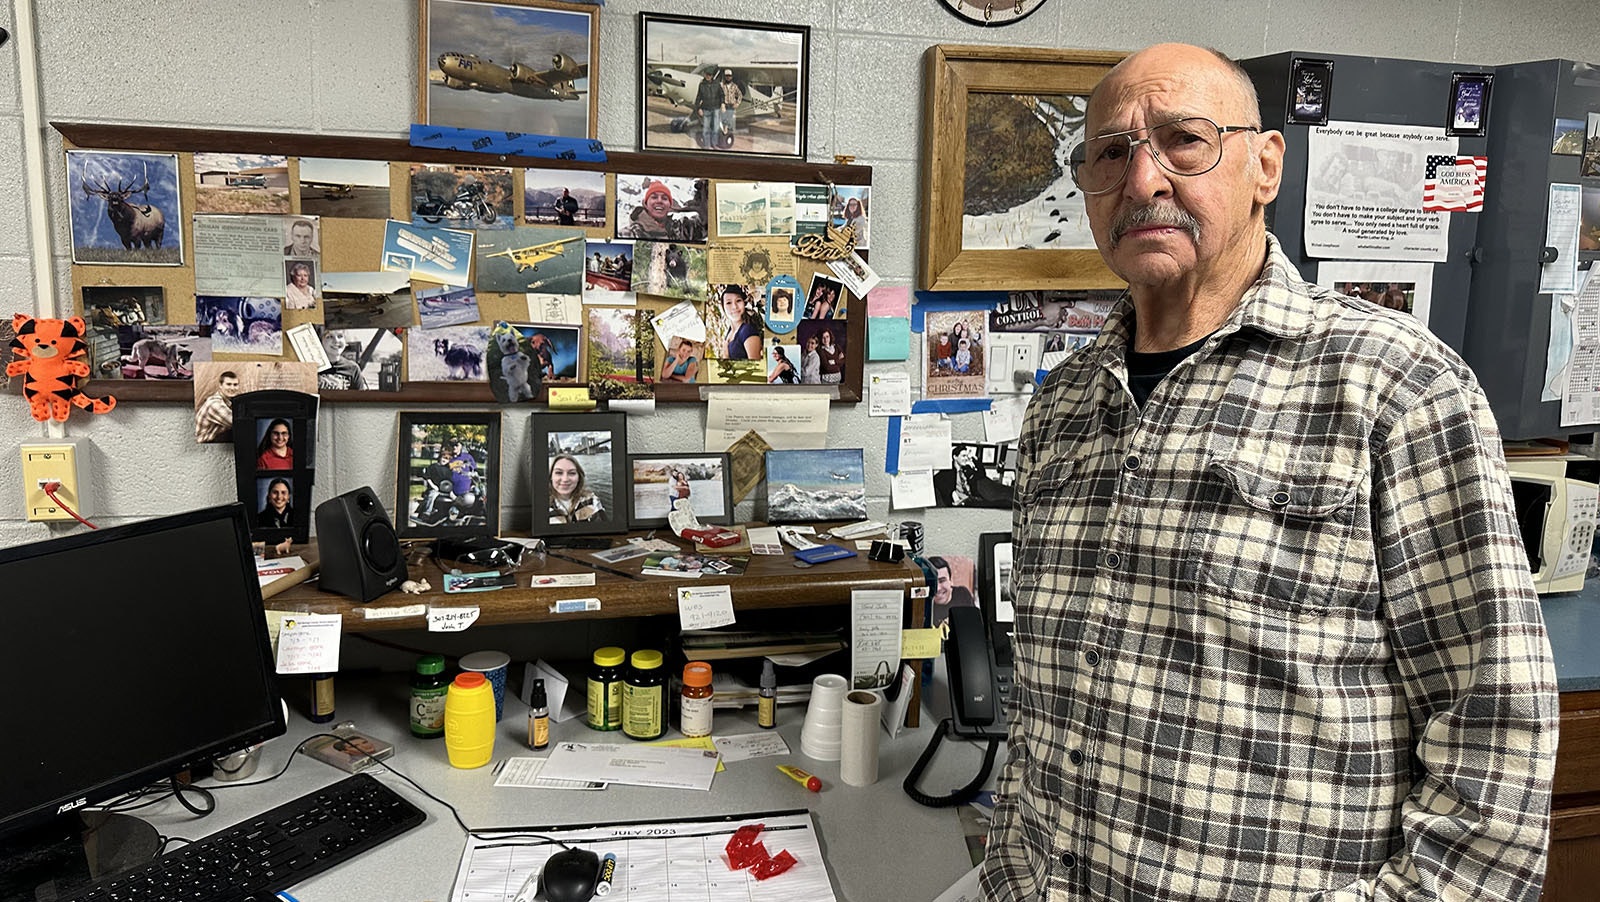 "Mr. Joe" Arnold has been with the Hot Springs County School District for 40 years, and cleaning Wyoming schools for 60 years. To students and staff, he's much more than a custodian, he's a friend and mentor.